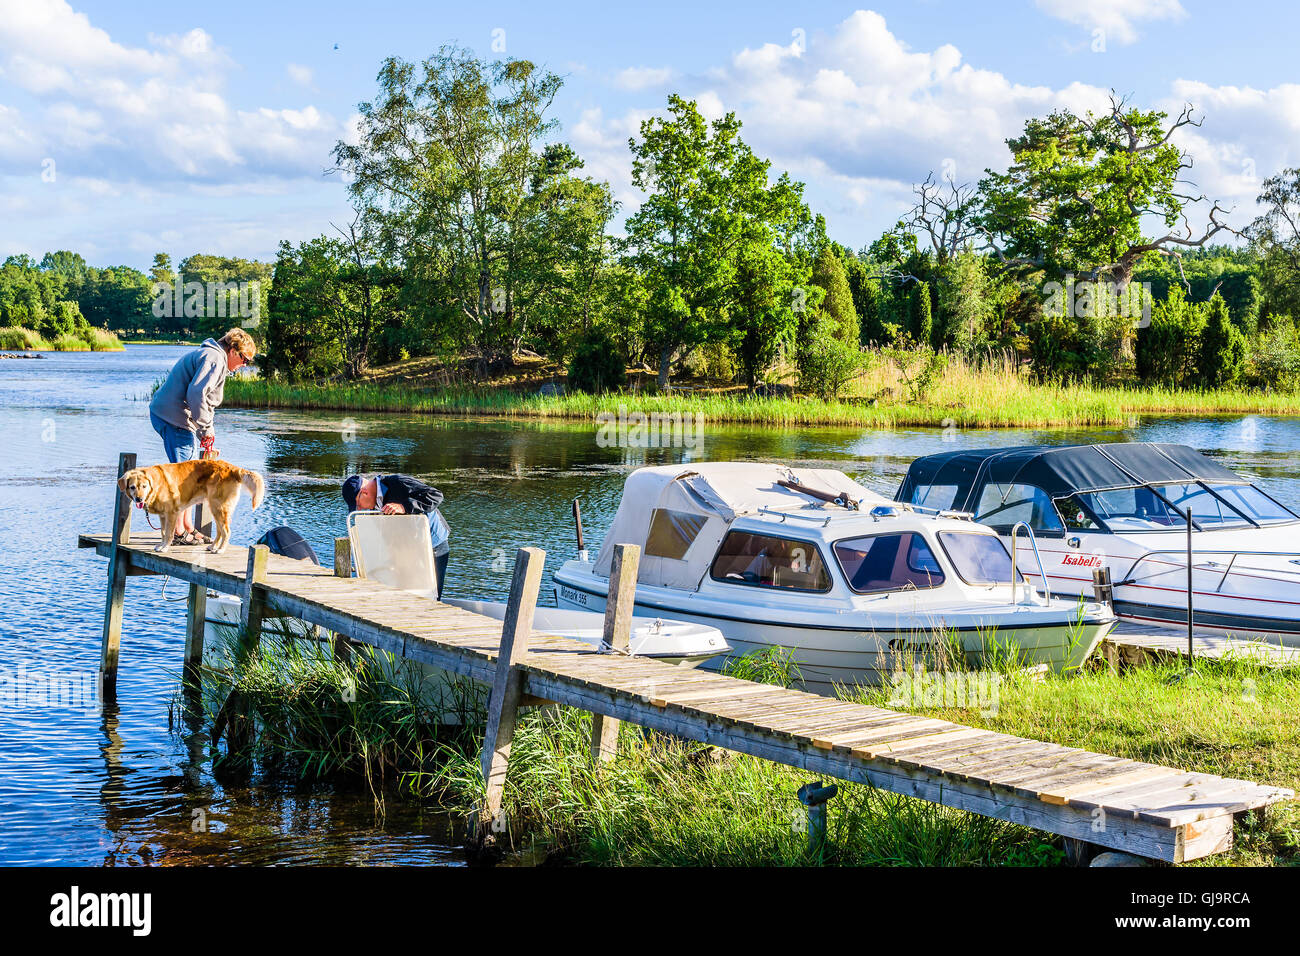 Pataholm, Sweden - August 9, 2016: Senior couple getting ready to go for a boat trip with their dog. Woman and dog on pier while Stock Photo